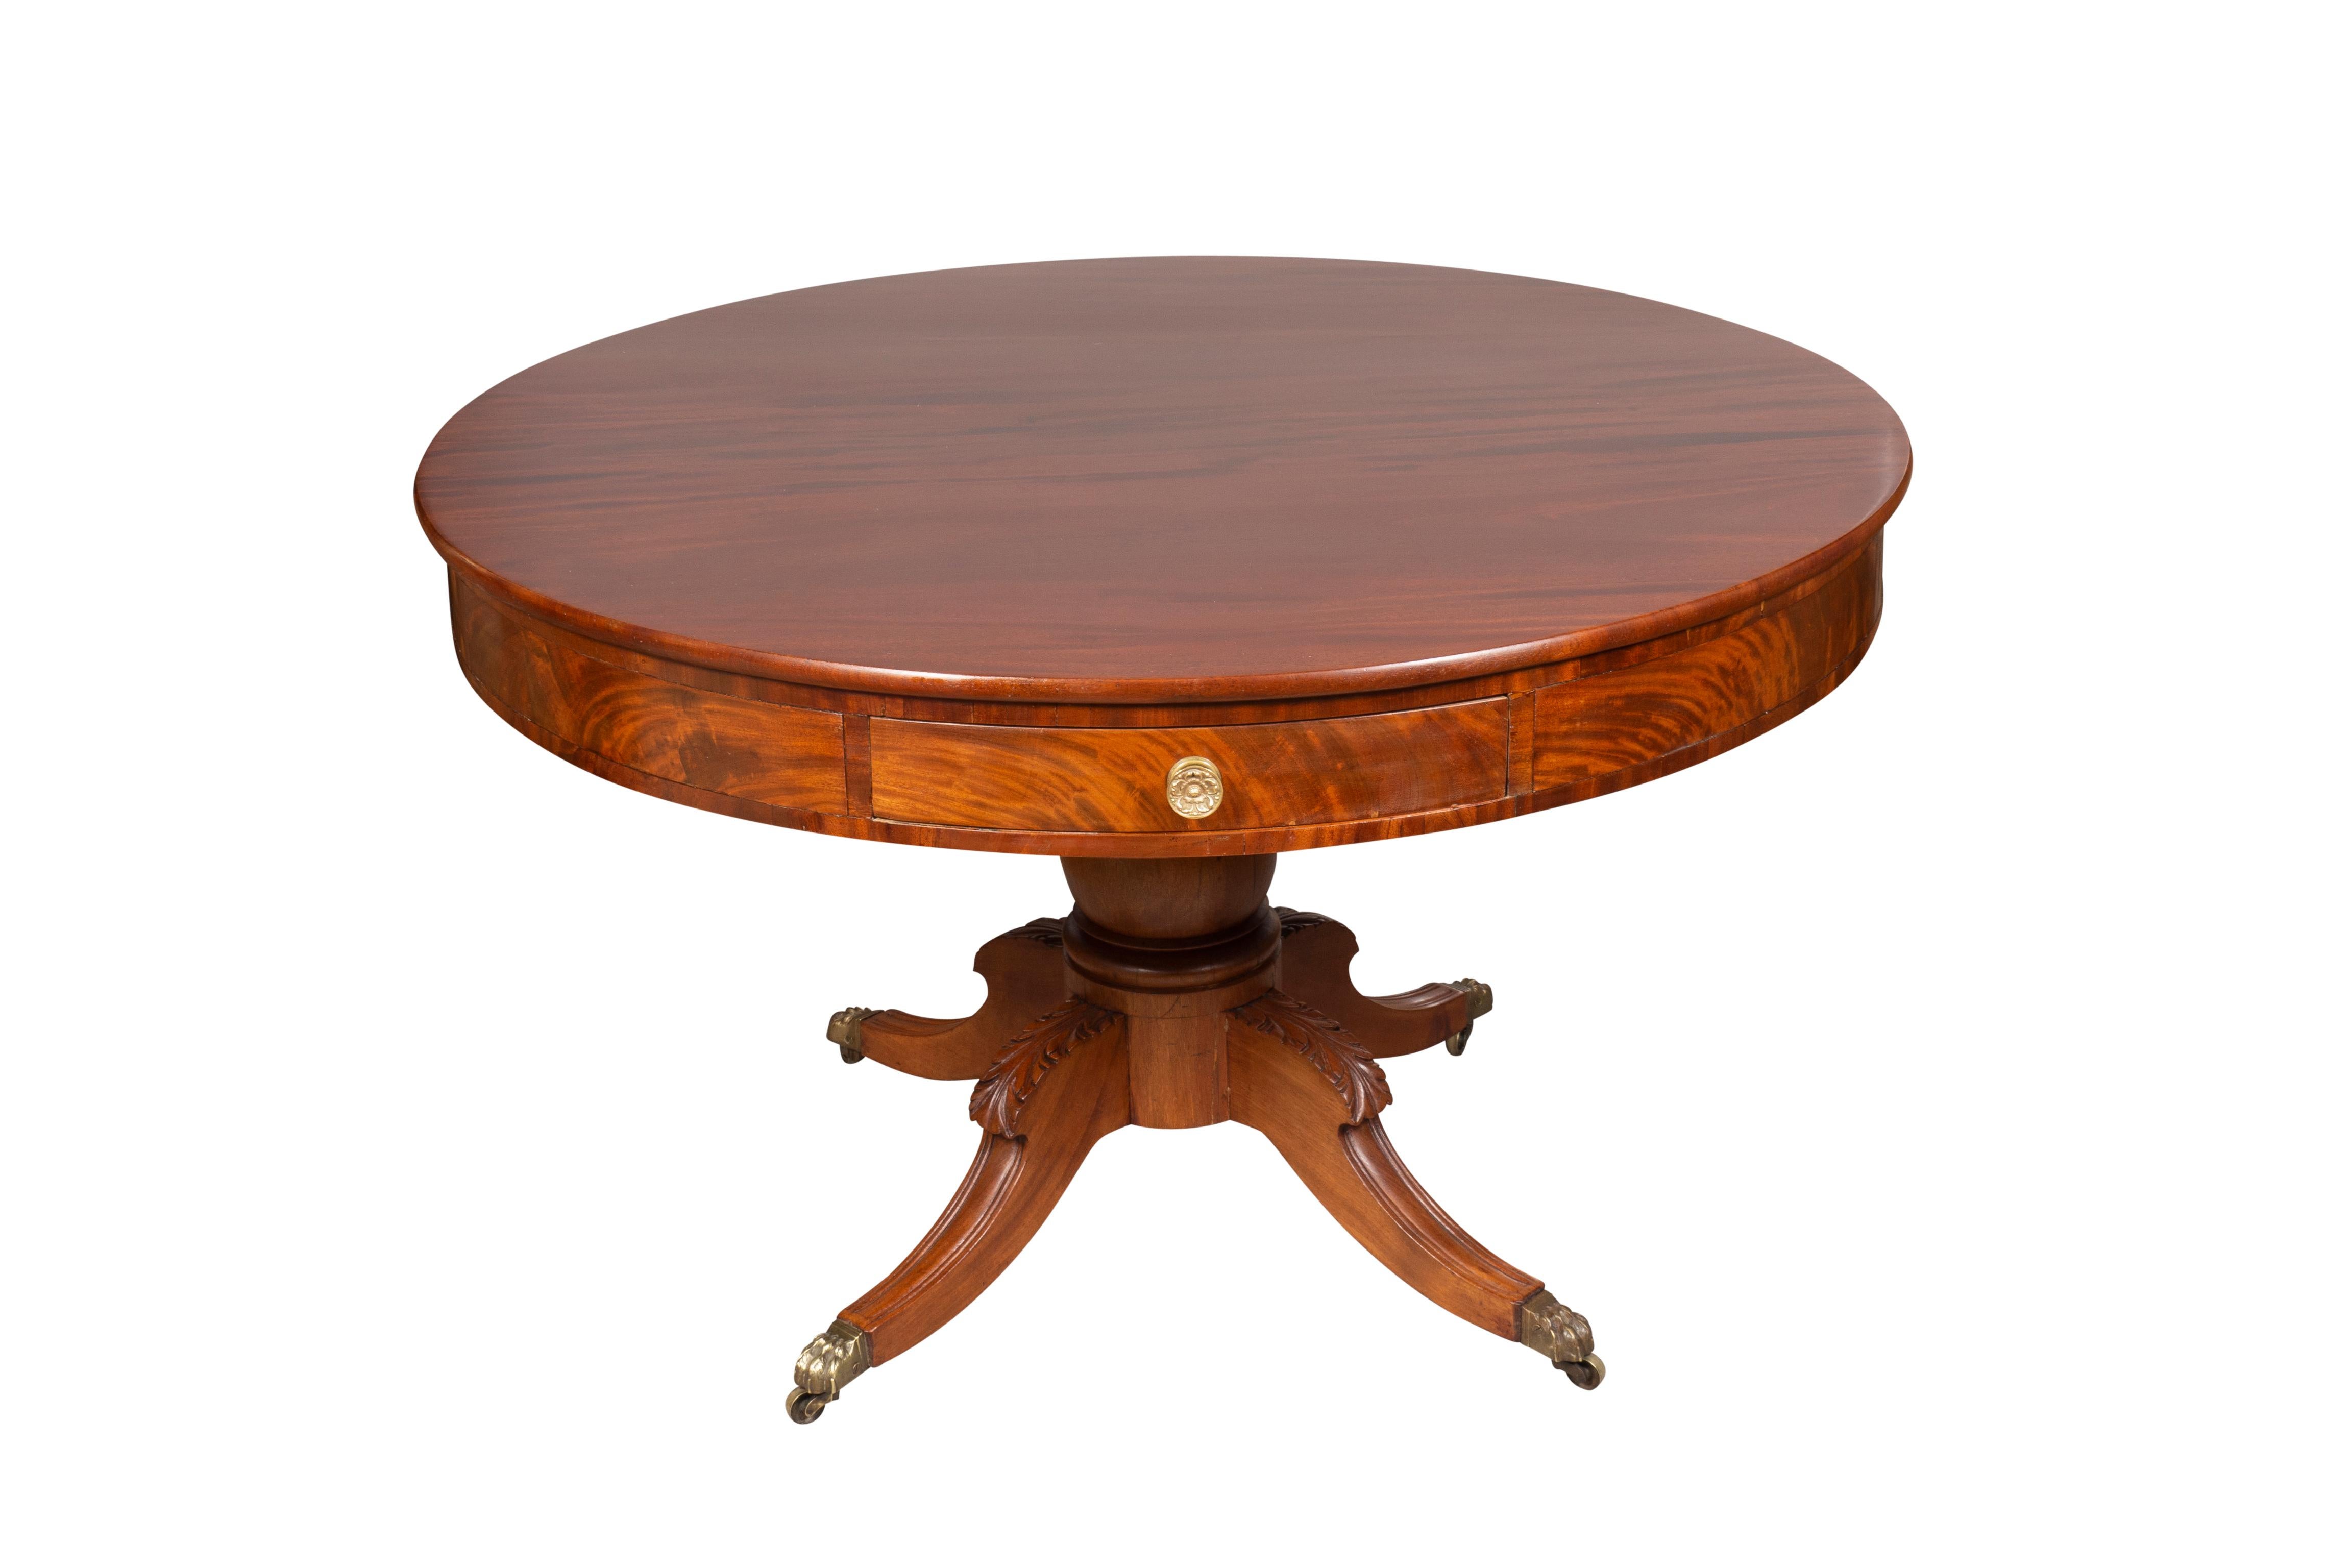 Likely Mid Atlantic states. With circular wood top with a conforming frieze with figured mahogany and with drawers with brass knob handles. Raised on a bulbous turned support joined by four carved saber legs and ending on brass paw cup casters.